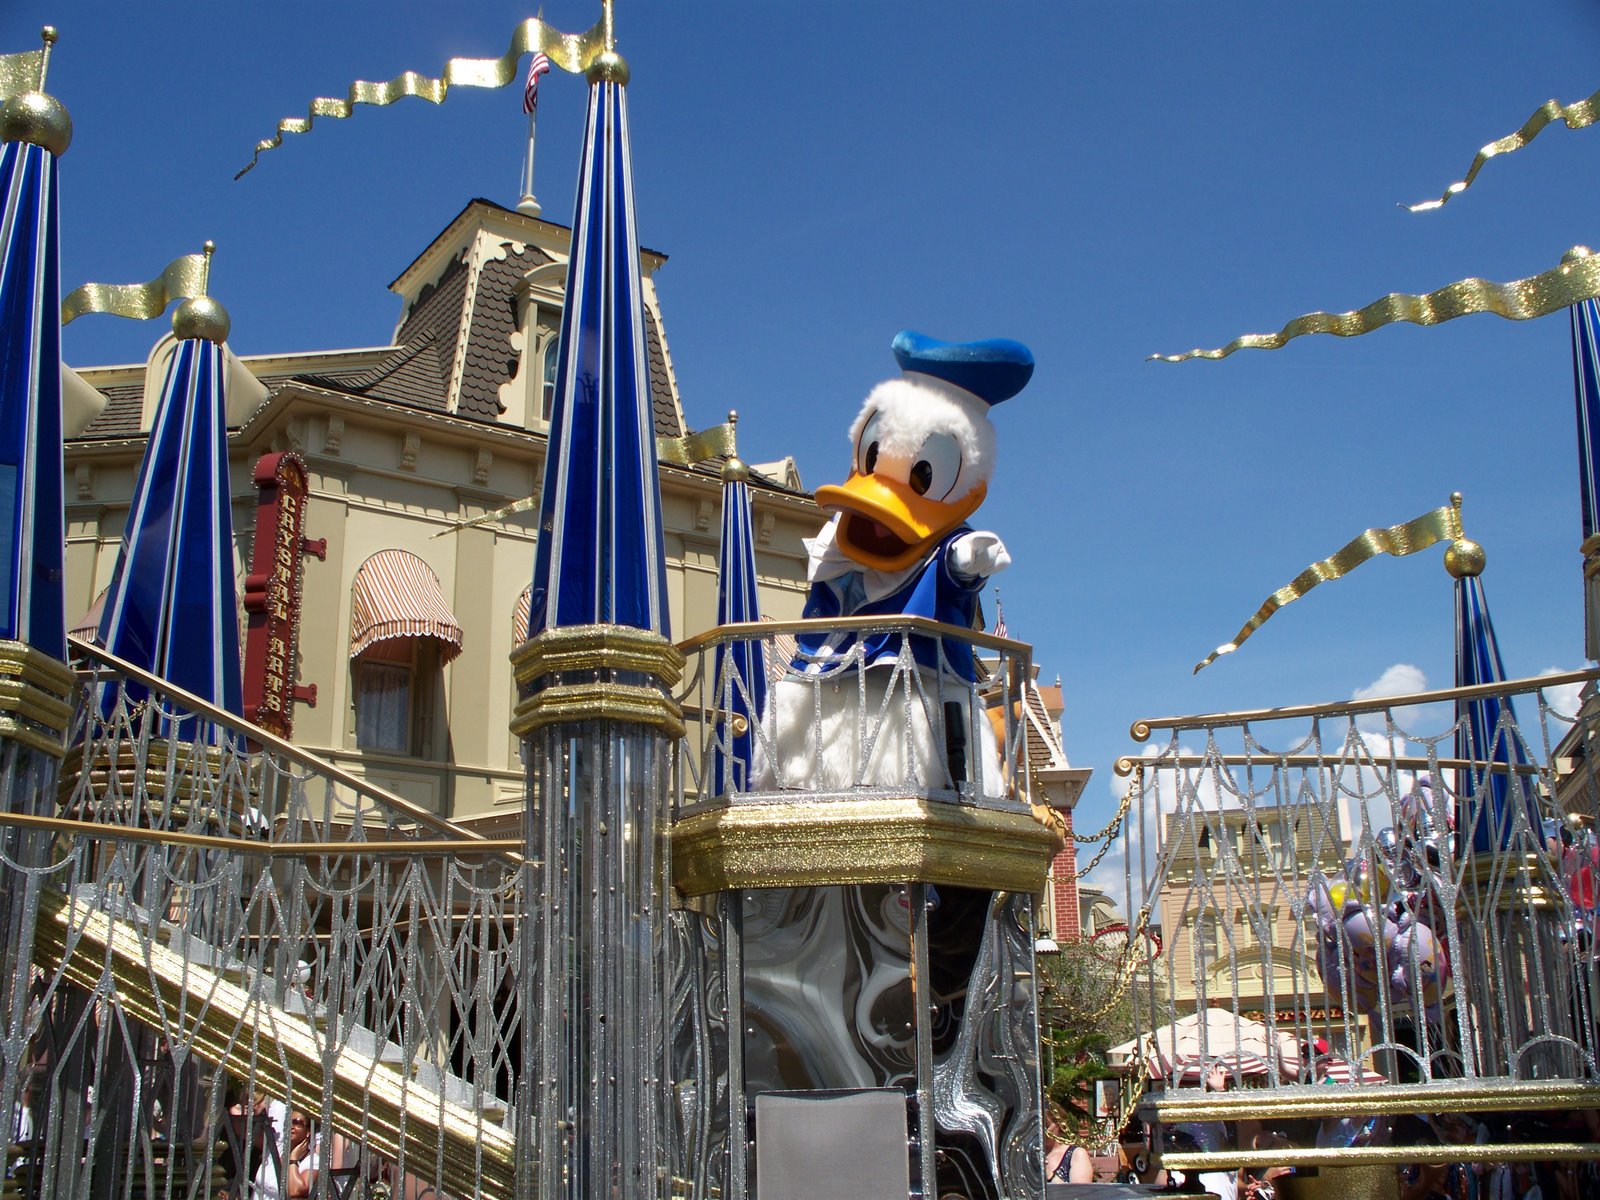 The Mercury Blogs: Disney Diva: Pictures from the Magic Kingdom Parade